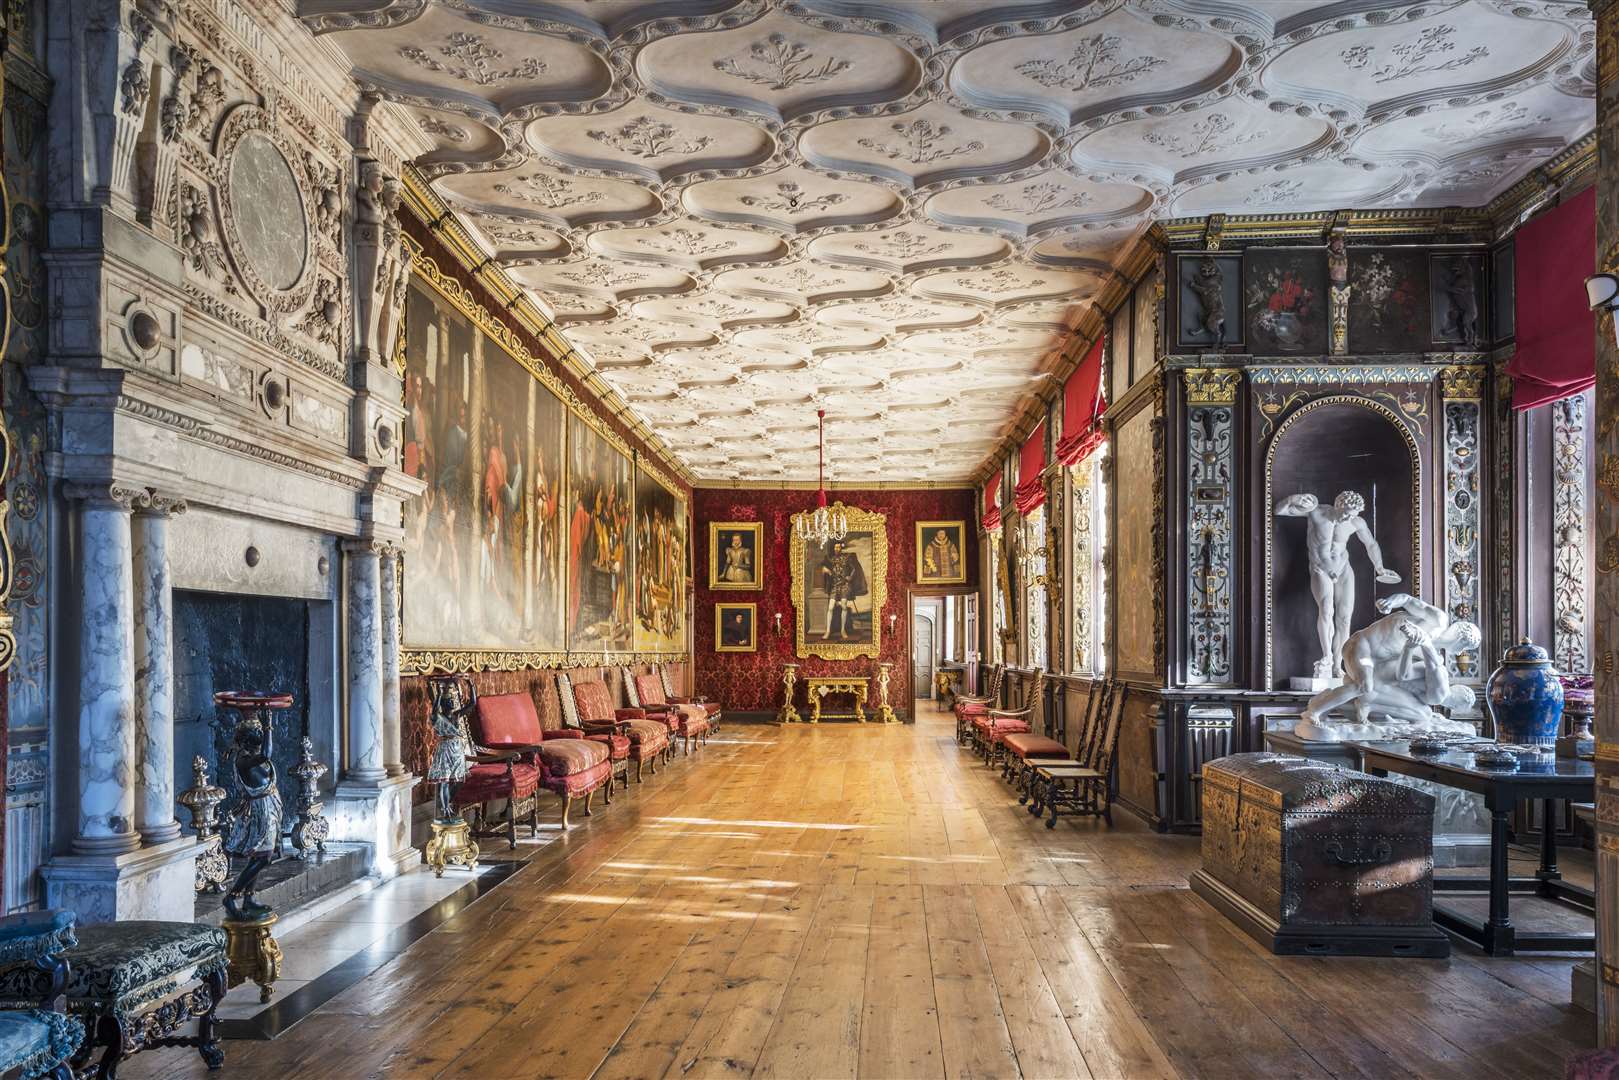 The Cartoon Gallery at Knole, Sevenoaks will reopen to visitors Picture: Andreas von Einsiedel/National Trust